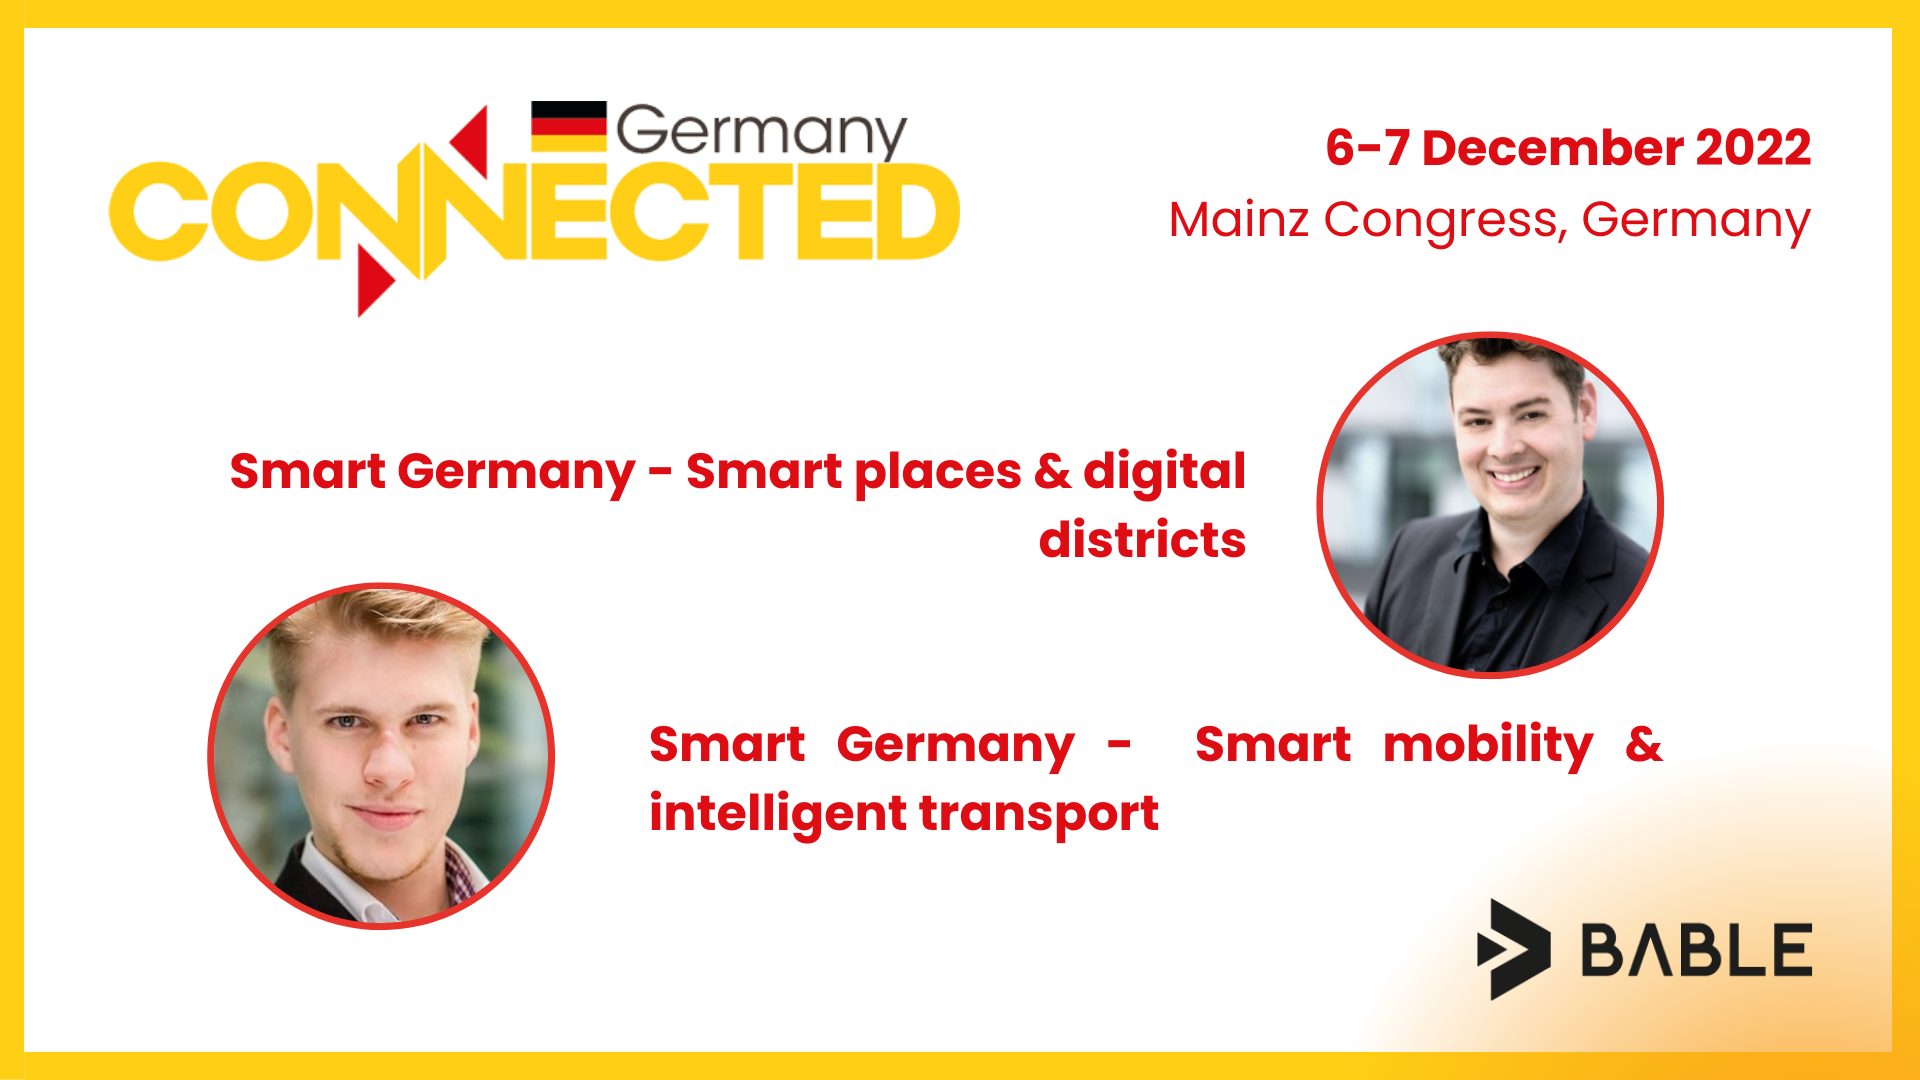 "Connected Germany" Conference